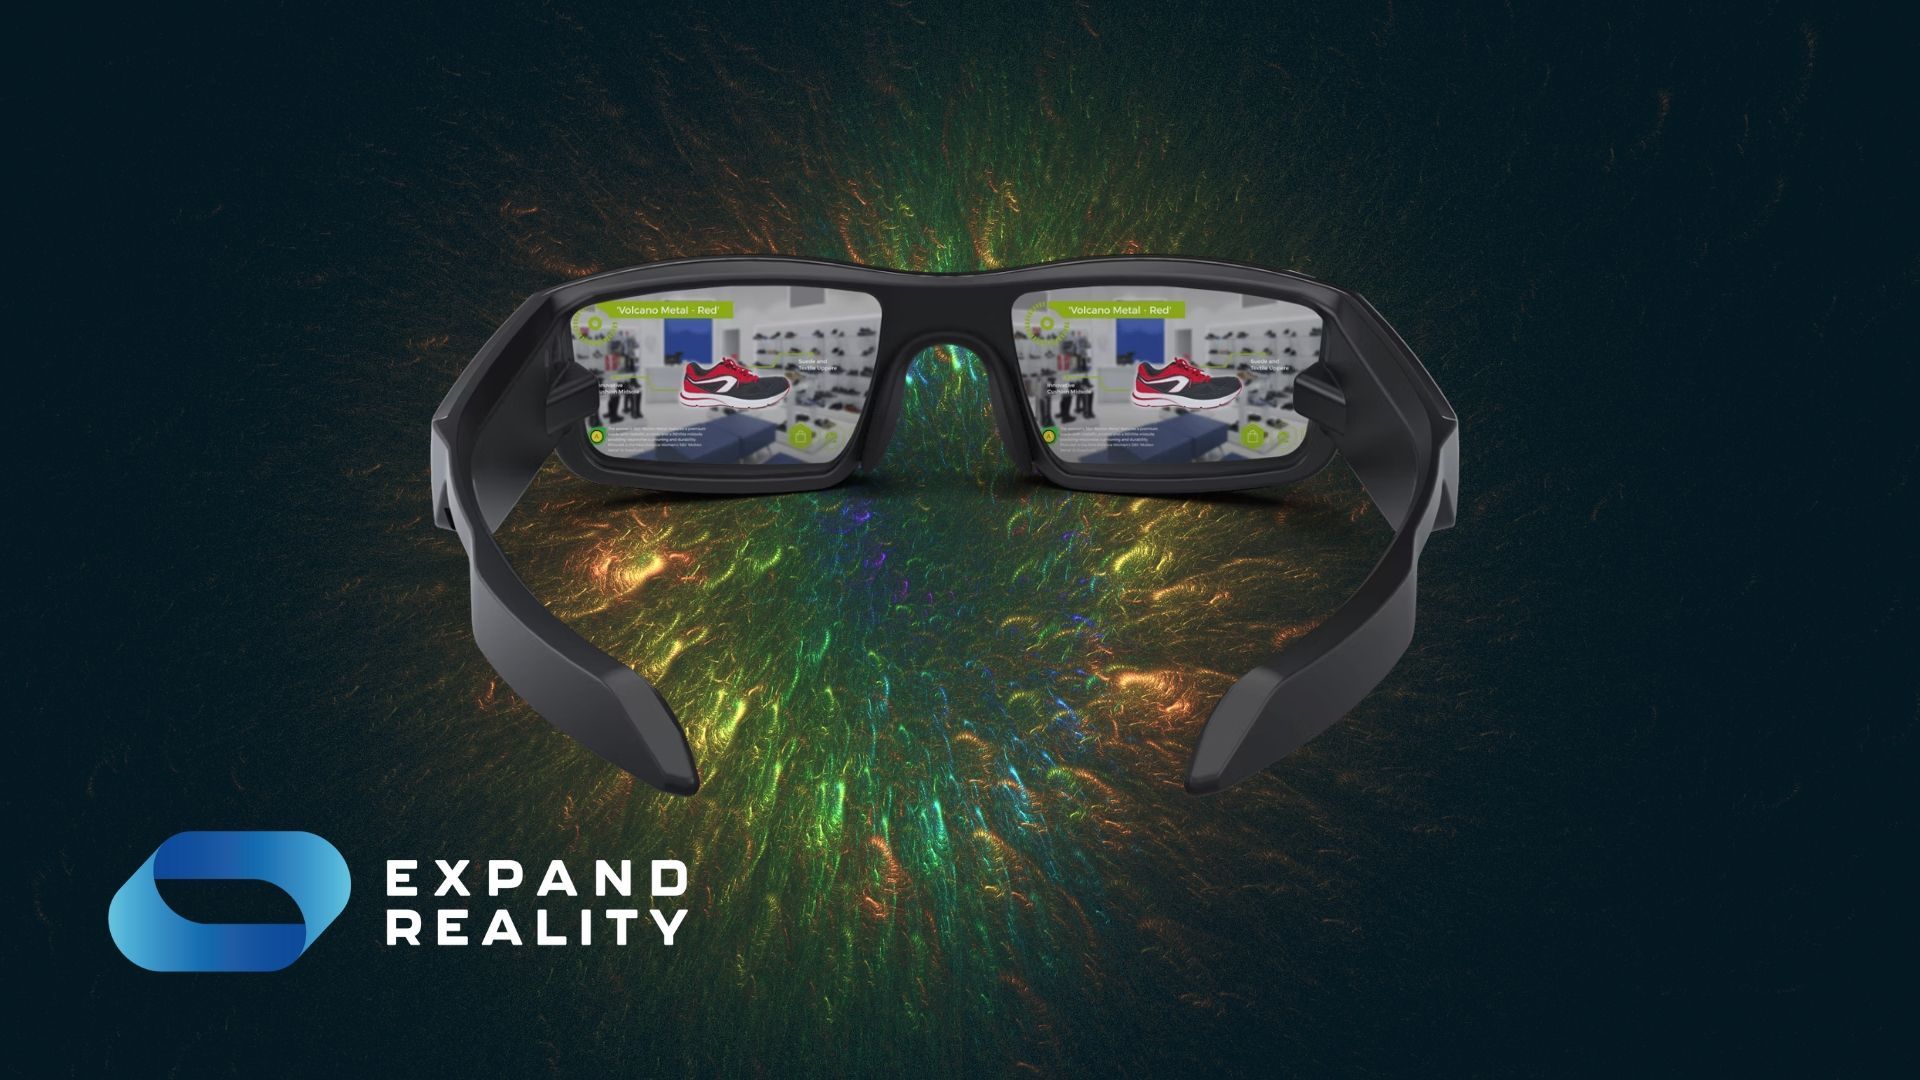 What is Vuzix? Join us as we take a look at the pioneering company that's been one of the leaders in XR technology for over 25 years.